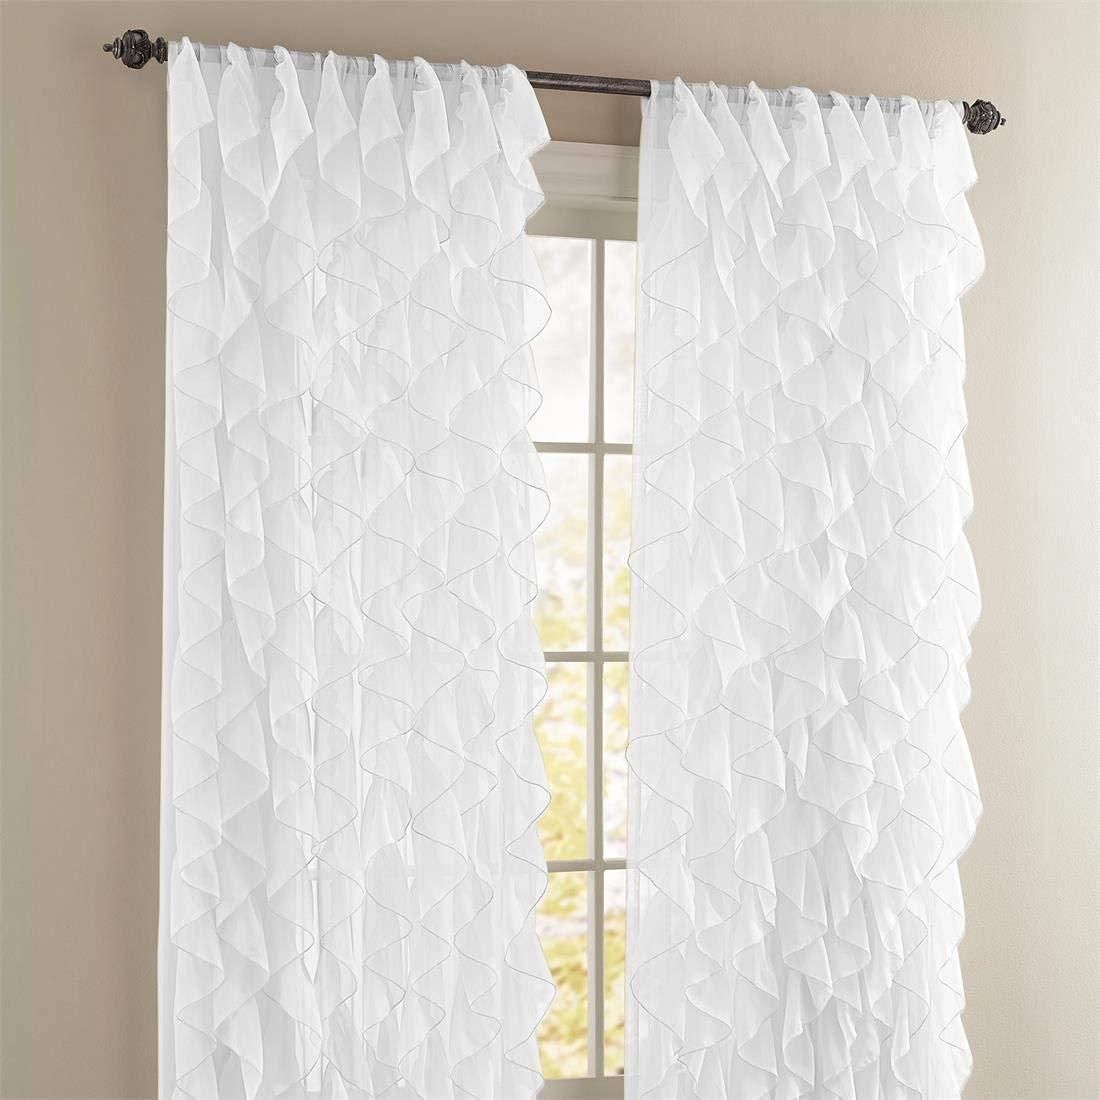 Cascade Ruffled Curtain Panel, 50" Wide84" Long, White, Lorraine Home In Vertical Ruffled Waterfall Valances And Curtain Tiers (View 15 of 20)